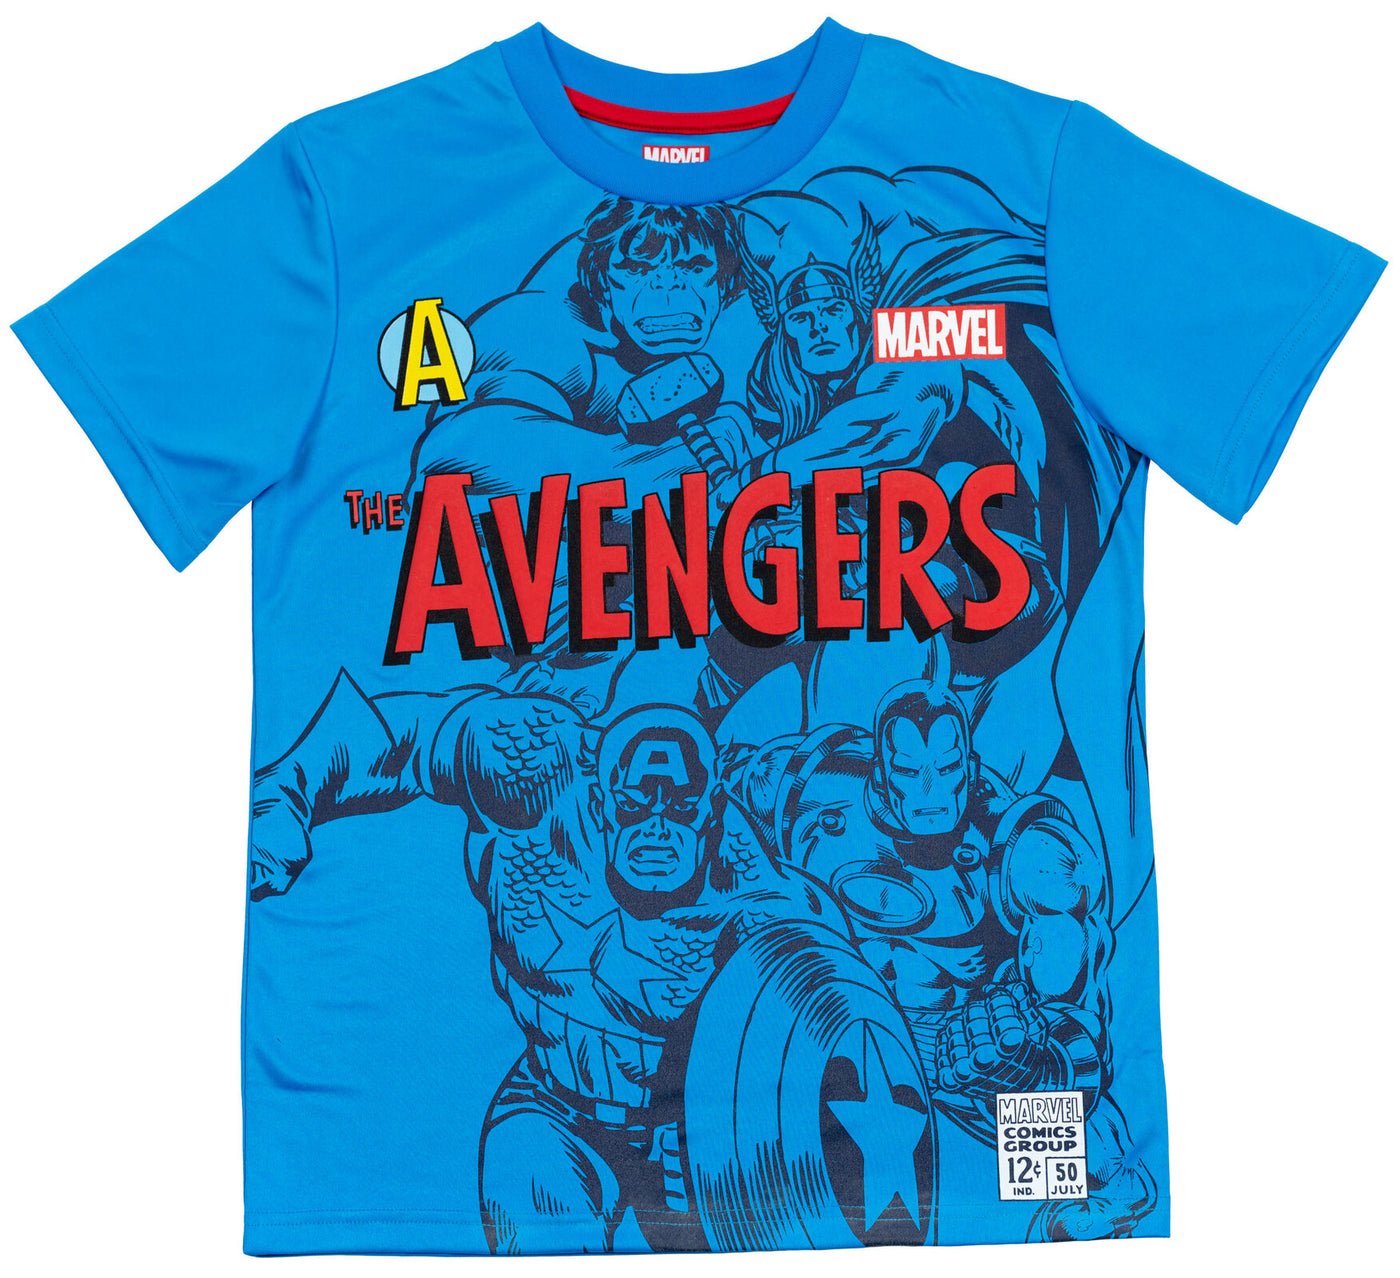 Marvel Avengers T-Shirt and Mesh Shorts Outfit Set